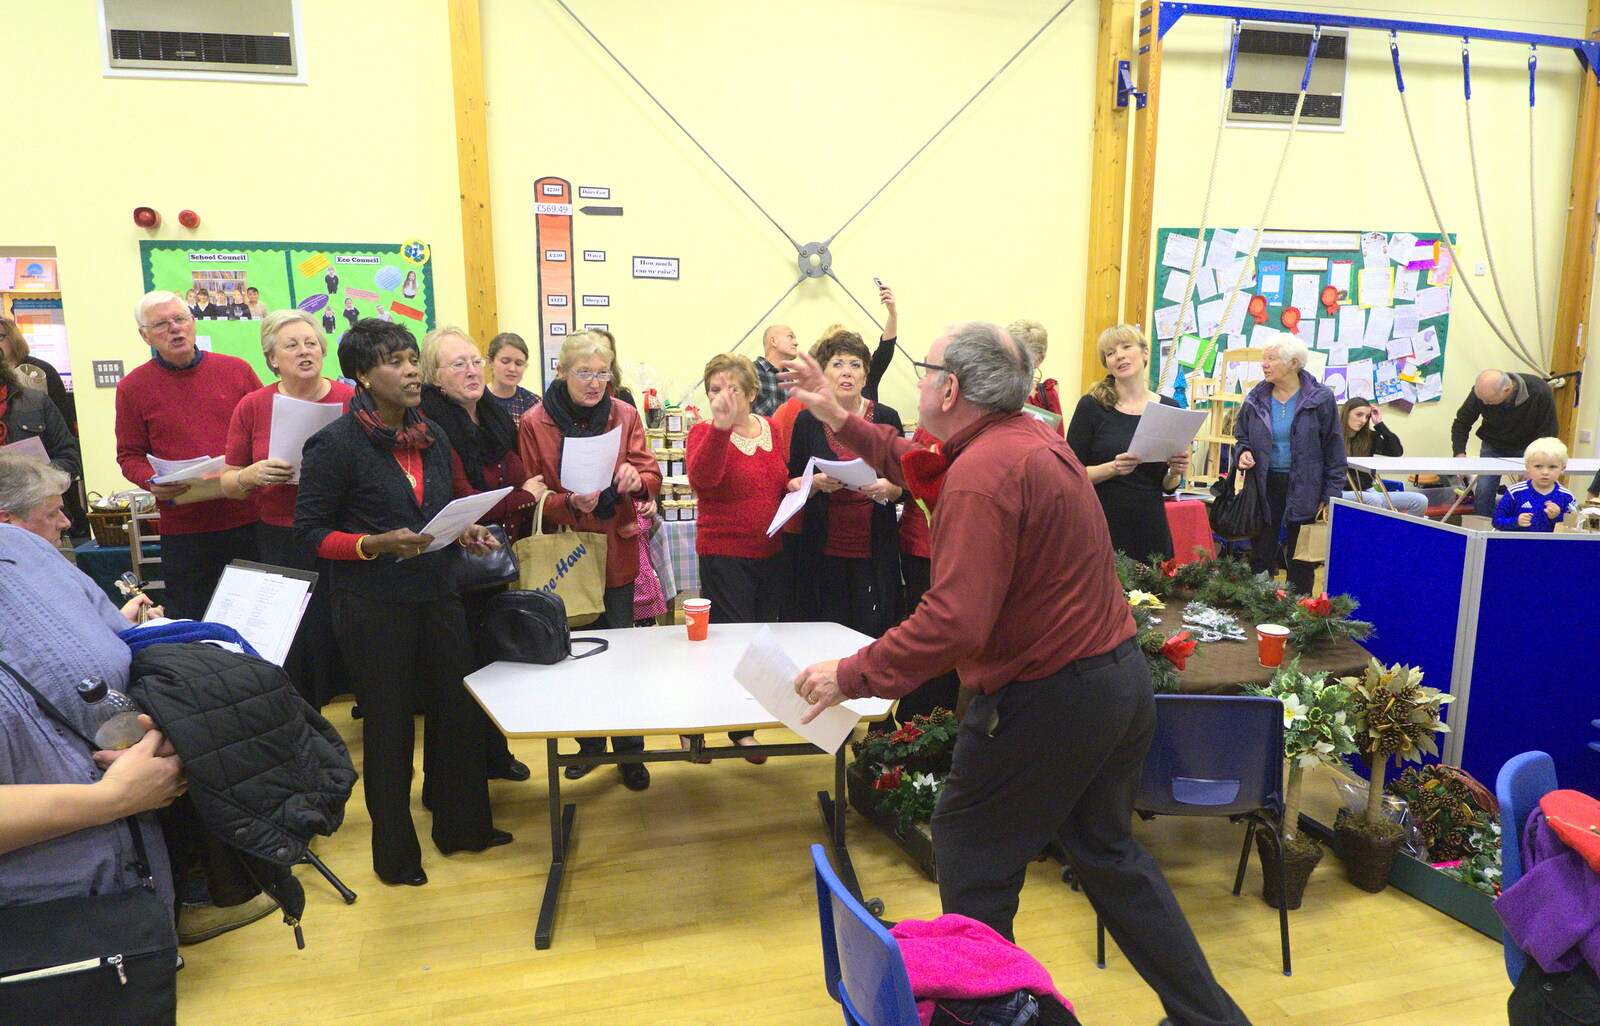 The choir master is very energetic from November Singing, Gislingham Primary School, Suffolk - 17th November 2014